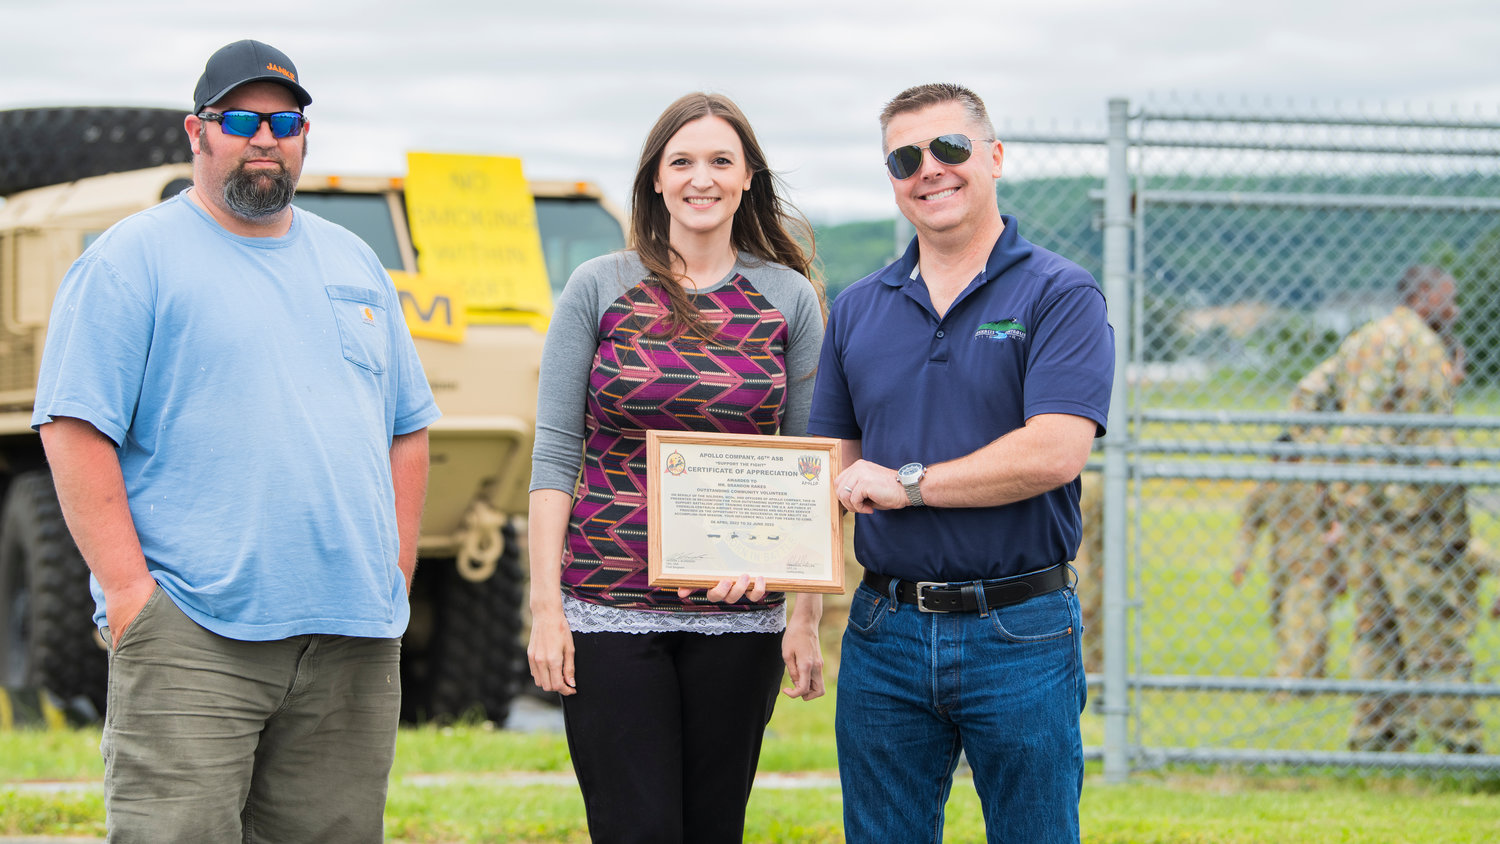 From left, Austin Barnes, Tara Sawyer, and Brandon Rakes pose for a photo with a certificate of appreciation from Apollo Company at the Chehalis-Centralia Airport during a military training exercise on Wednesday.